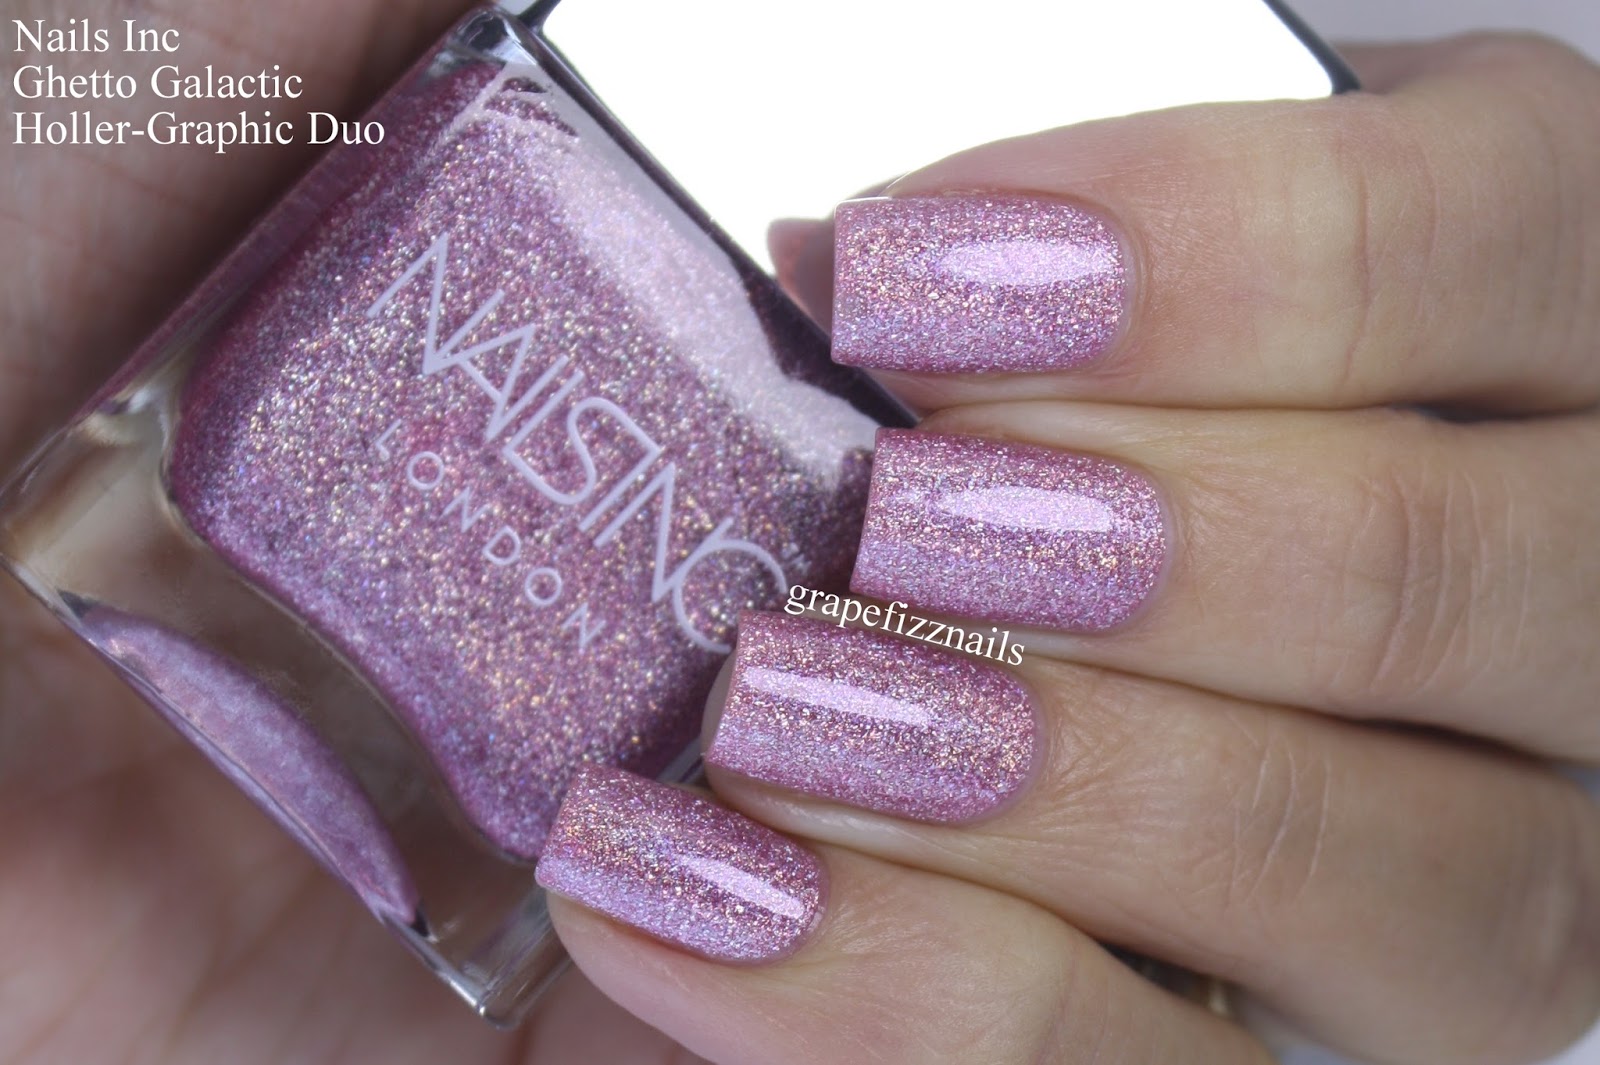 Grape Fizz Nails: Nails Inc Holler-Graphic Duo, Swatches and Review